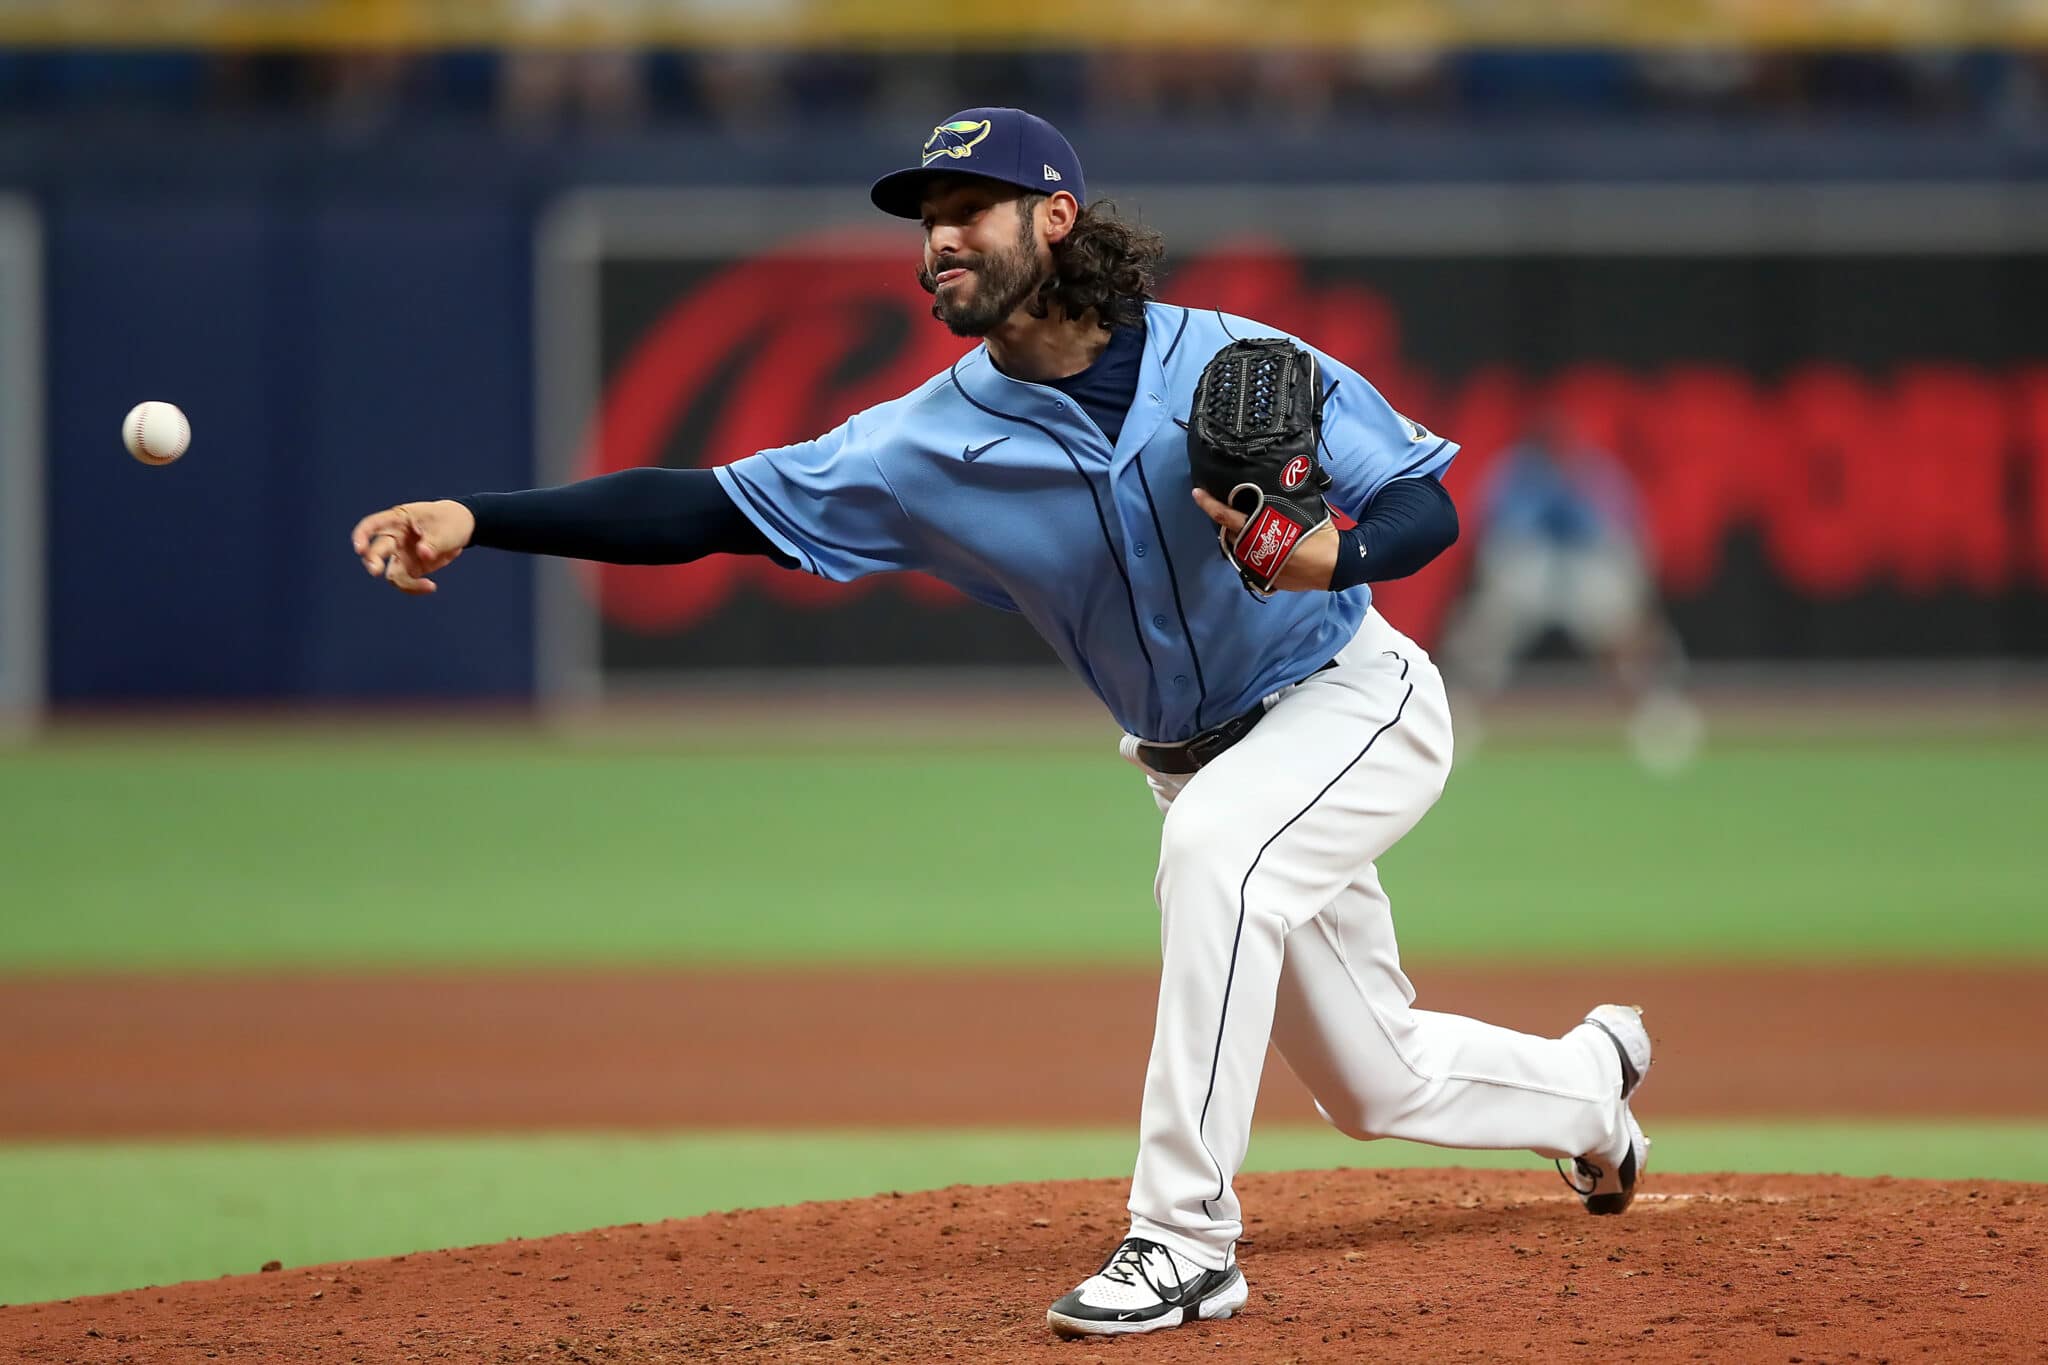 Absolute joke': Cards pitcher on Rays uniform opt-out